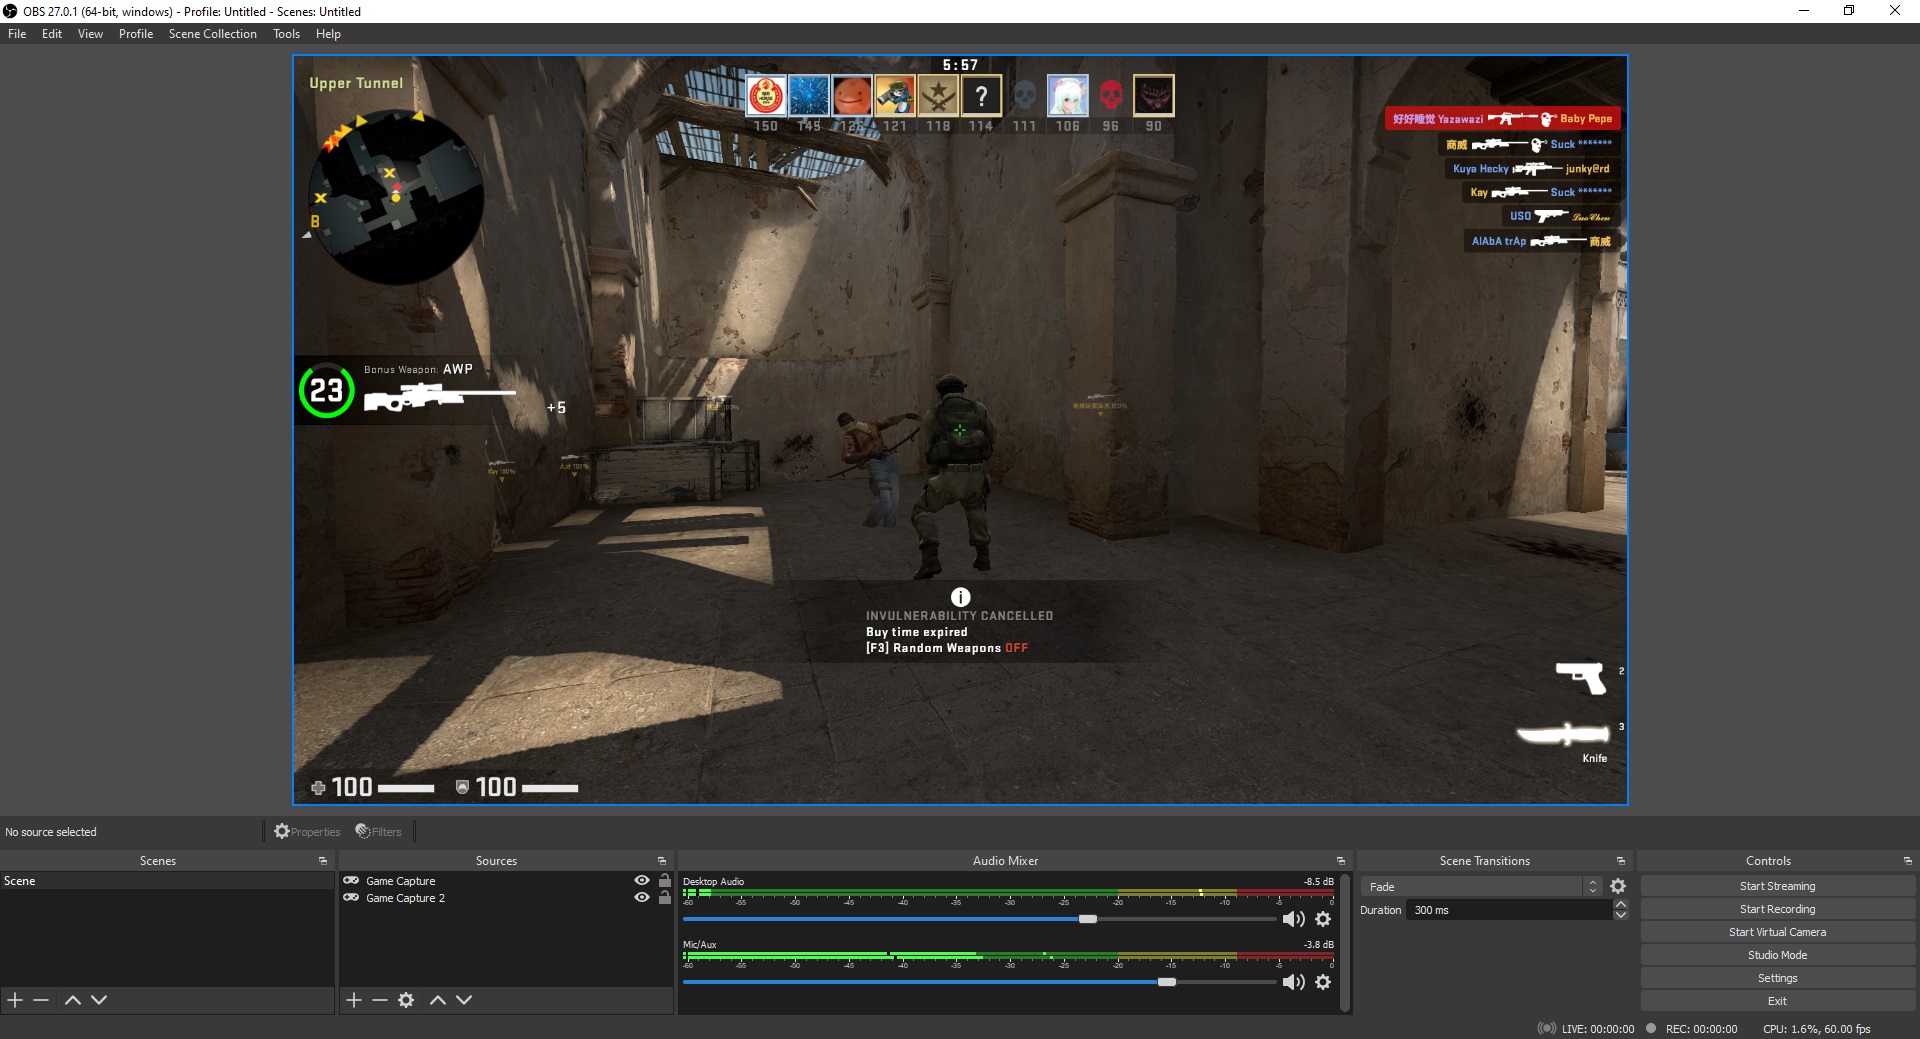 How to Fix Counter-Strike: GO Black Screen on OBS